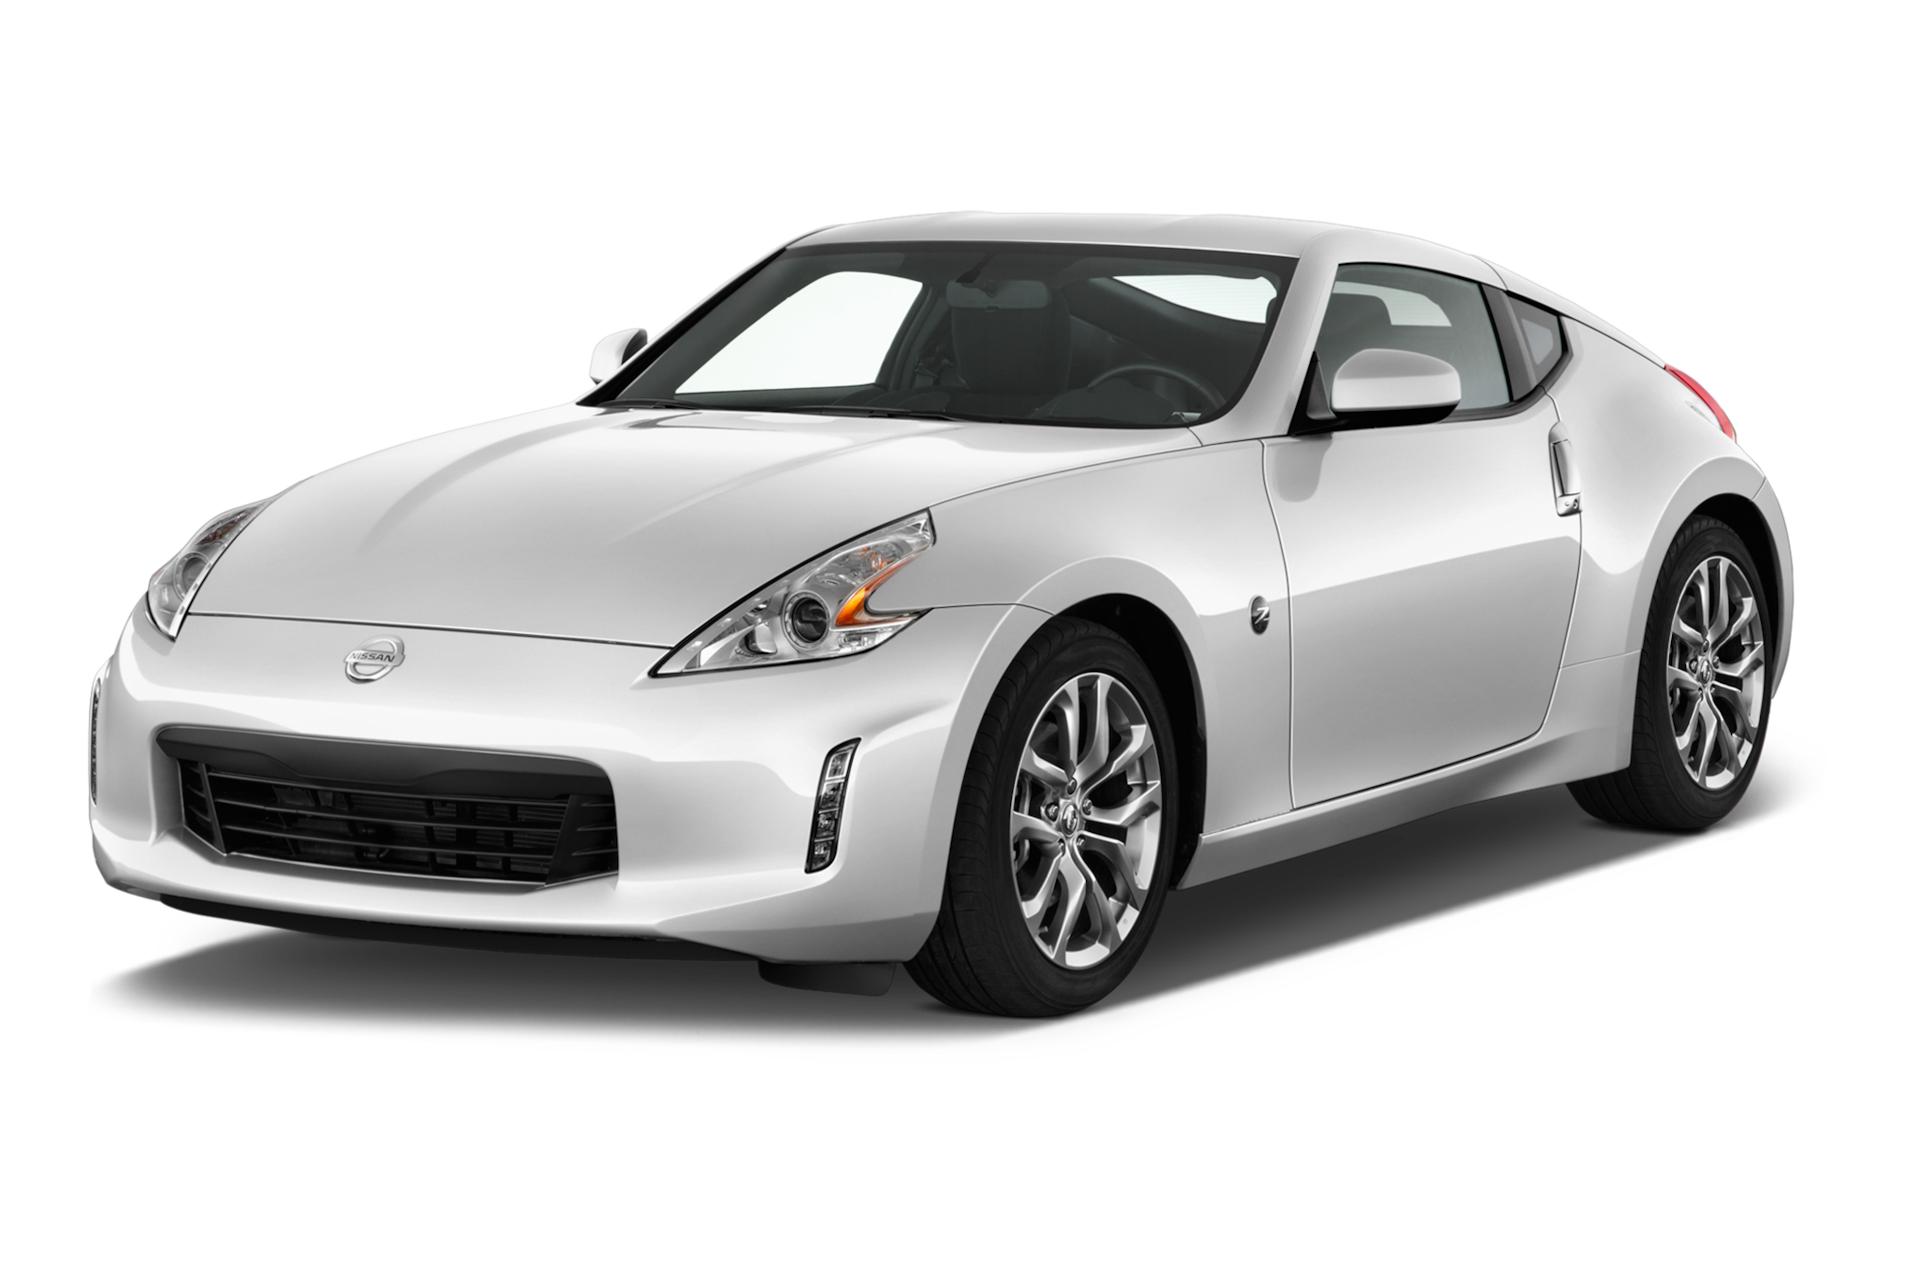 2015 Nissan 370Z Prices, Reviews, and Photos - MotorTrend